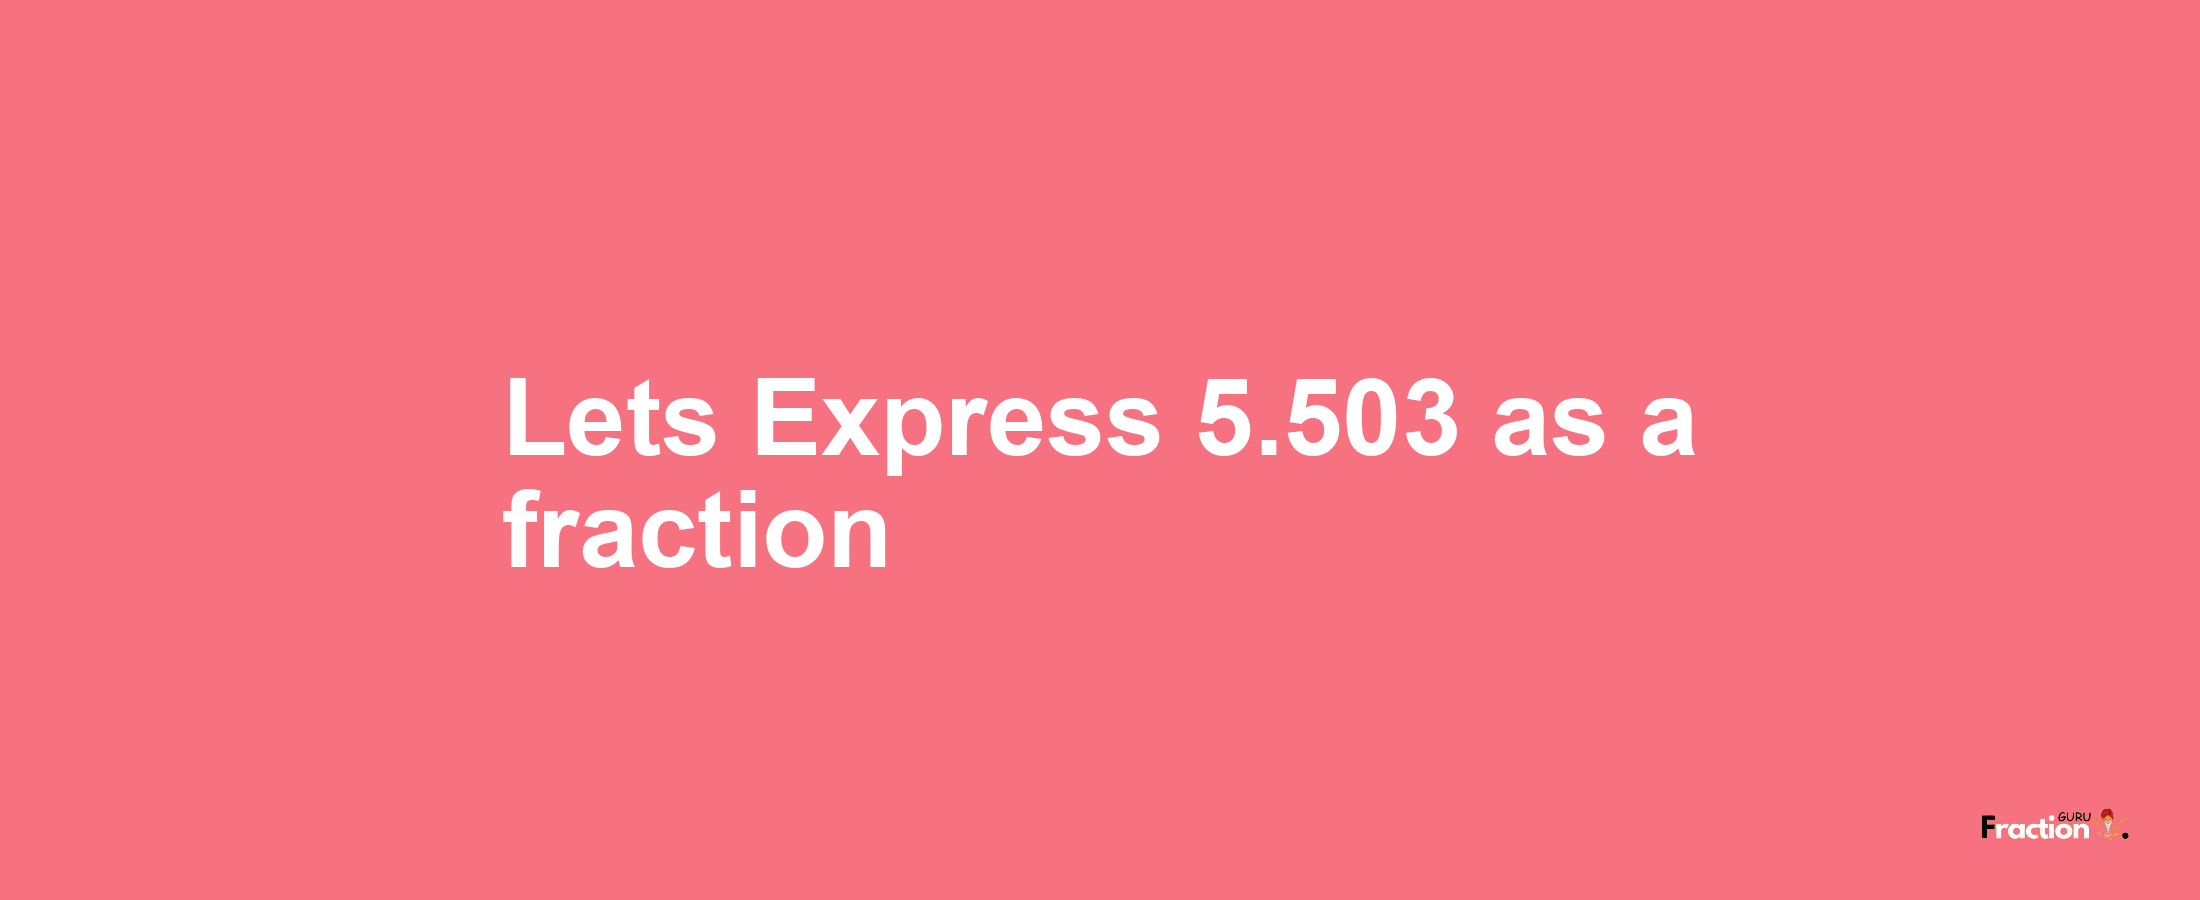 Lets Express 5.503 as afraction